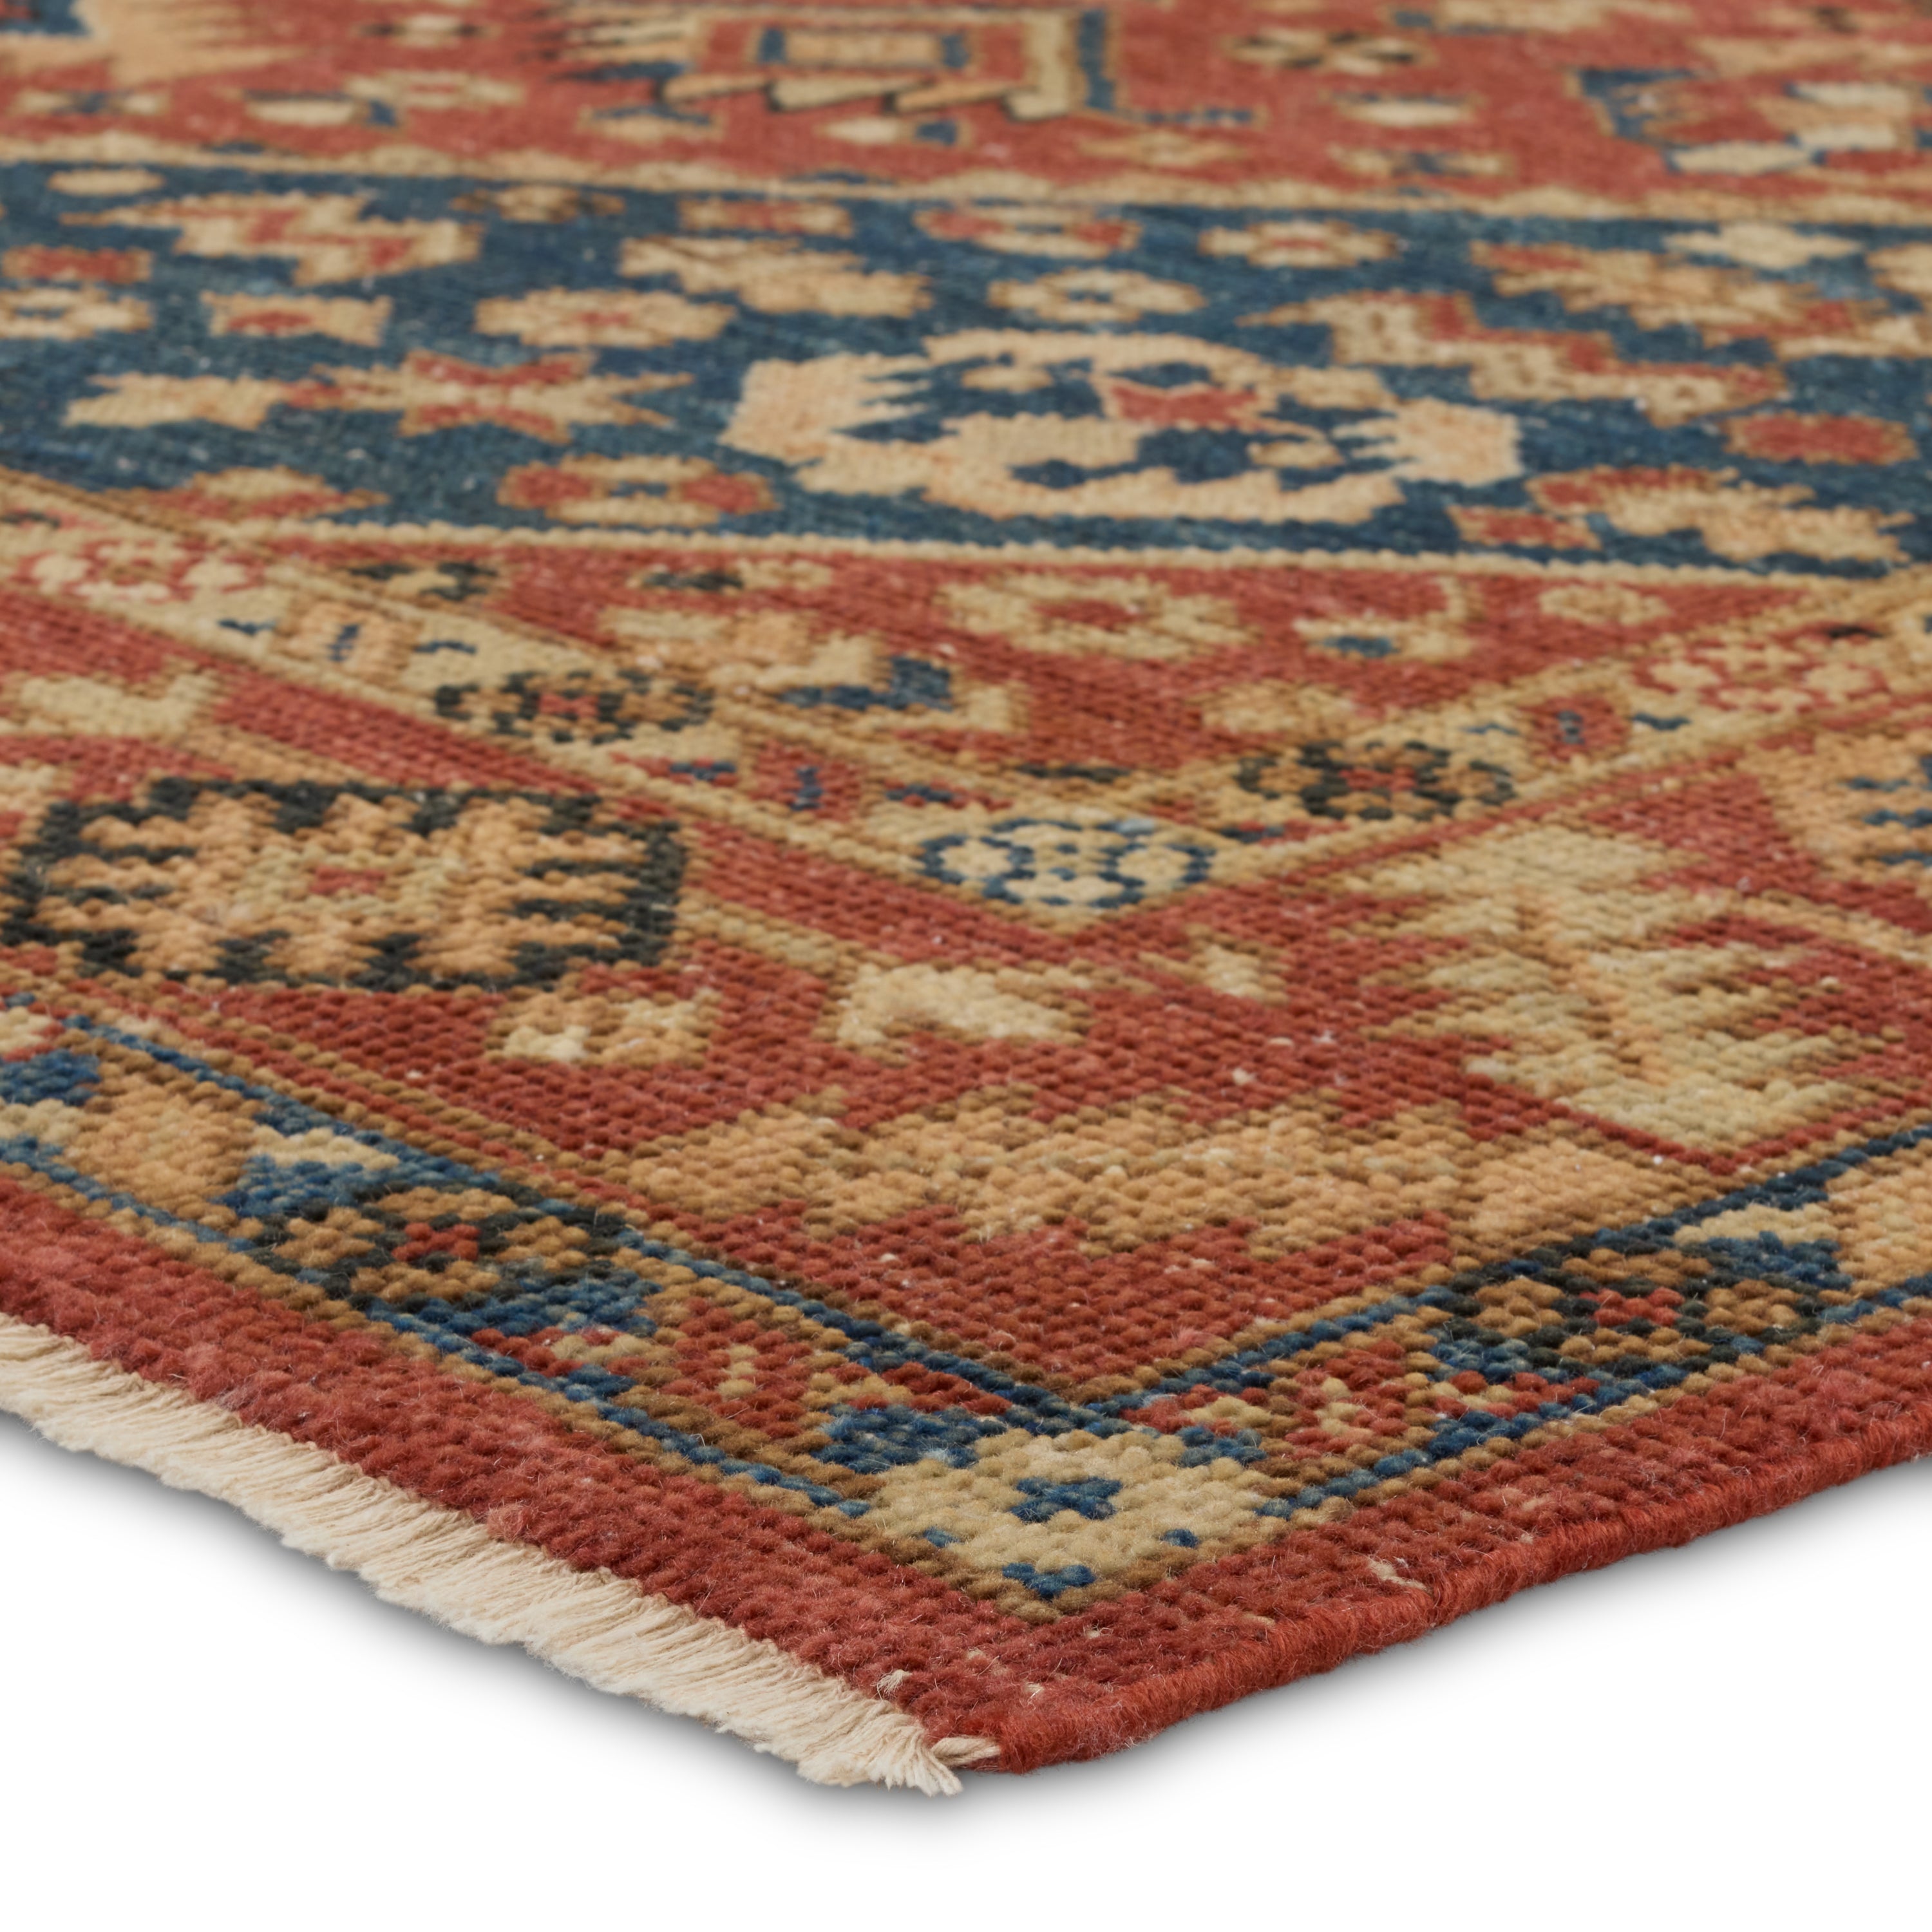 The Rhapsody collection features heirloom-quality designs of stunningly abrashed Old World patterns. The Lucius area rug boasts a beautifully washed center-medallion with a decorative border. The red tones are accented with blue, black, cream, orange, and brown hues for added depth and intrigue. This durable wool handknot anchors living spaces with a fresh take on vintage style. Amethyst Home provides interior design, new construction, custom furniture, and area rugs in the Scottsdale metro area.